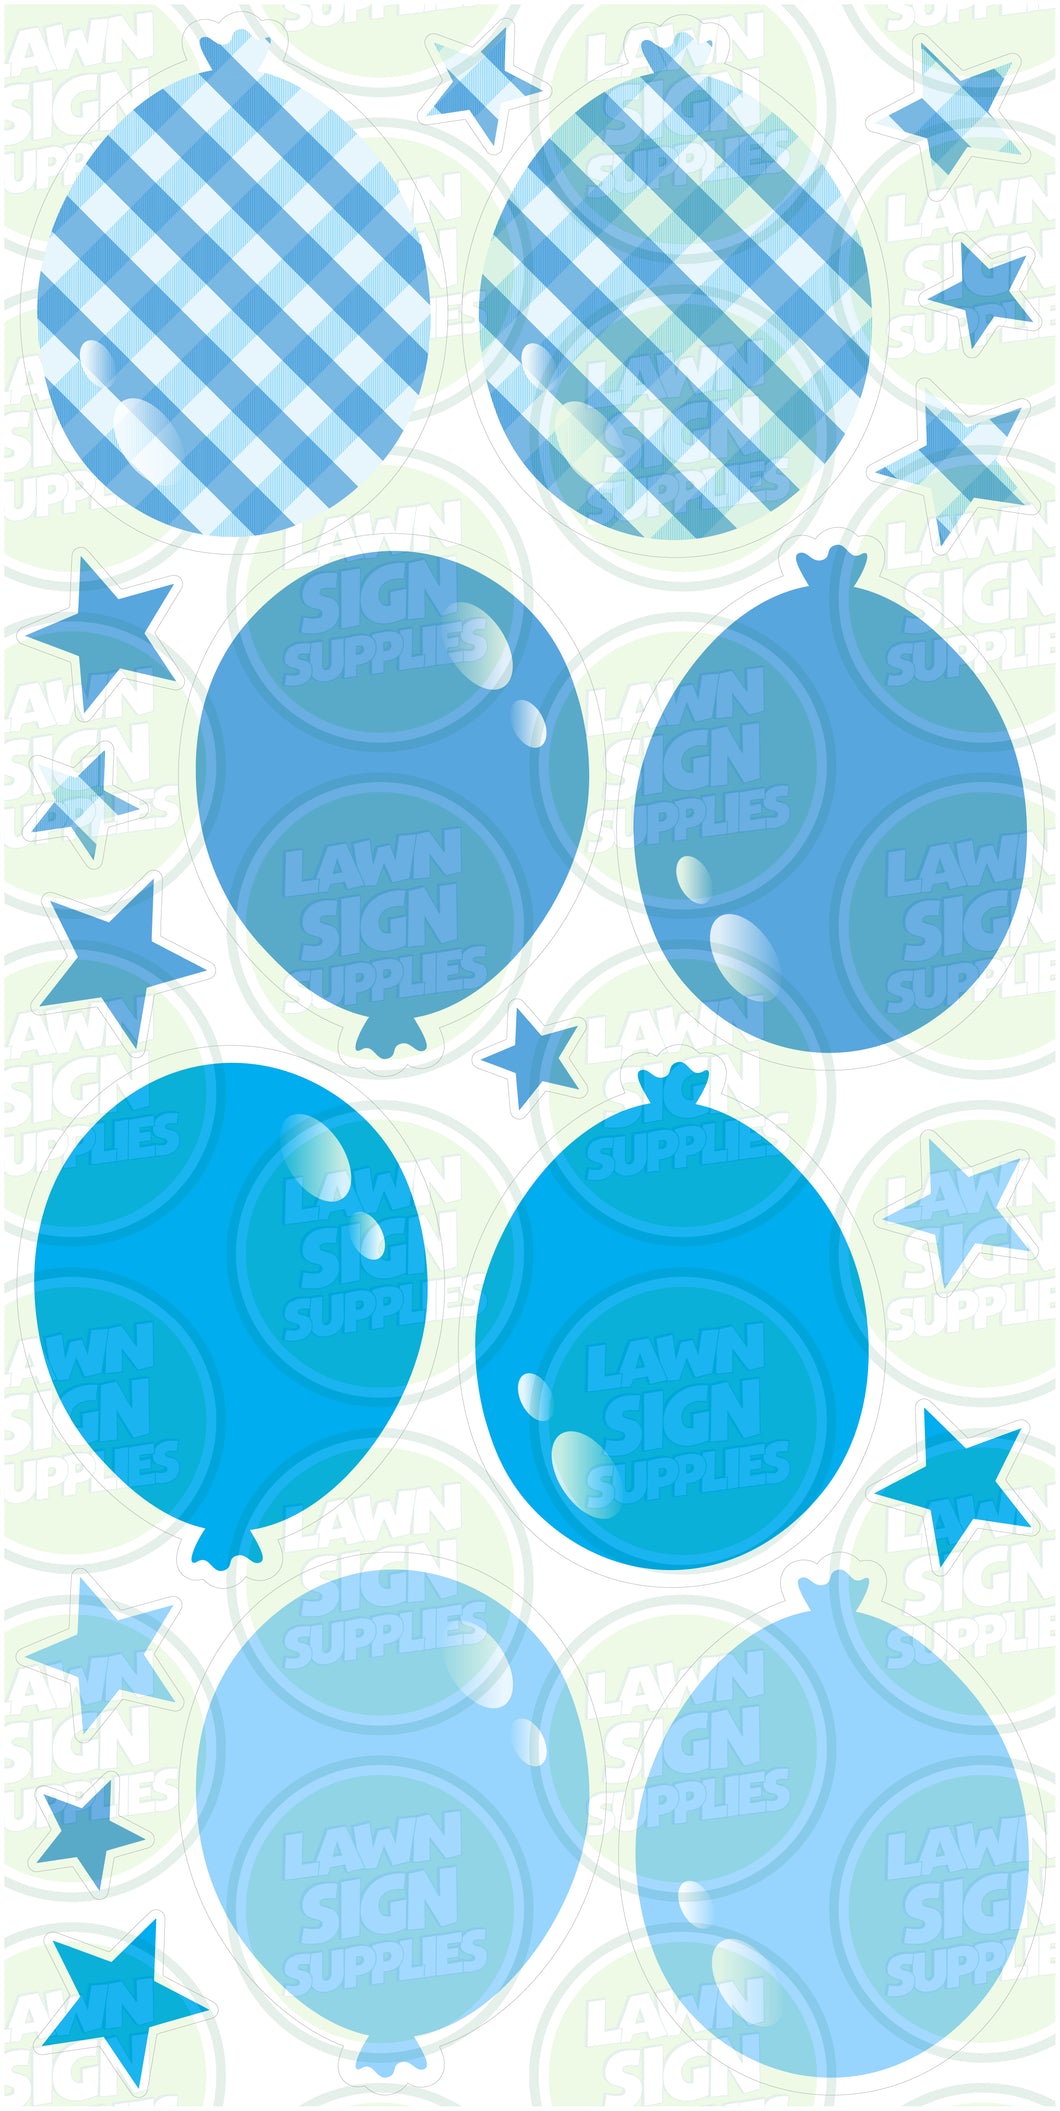 BALLOONS COMBO - BLUE MIX & BLUE GINGHAM